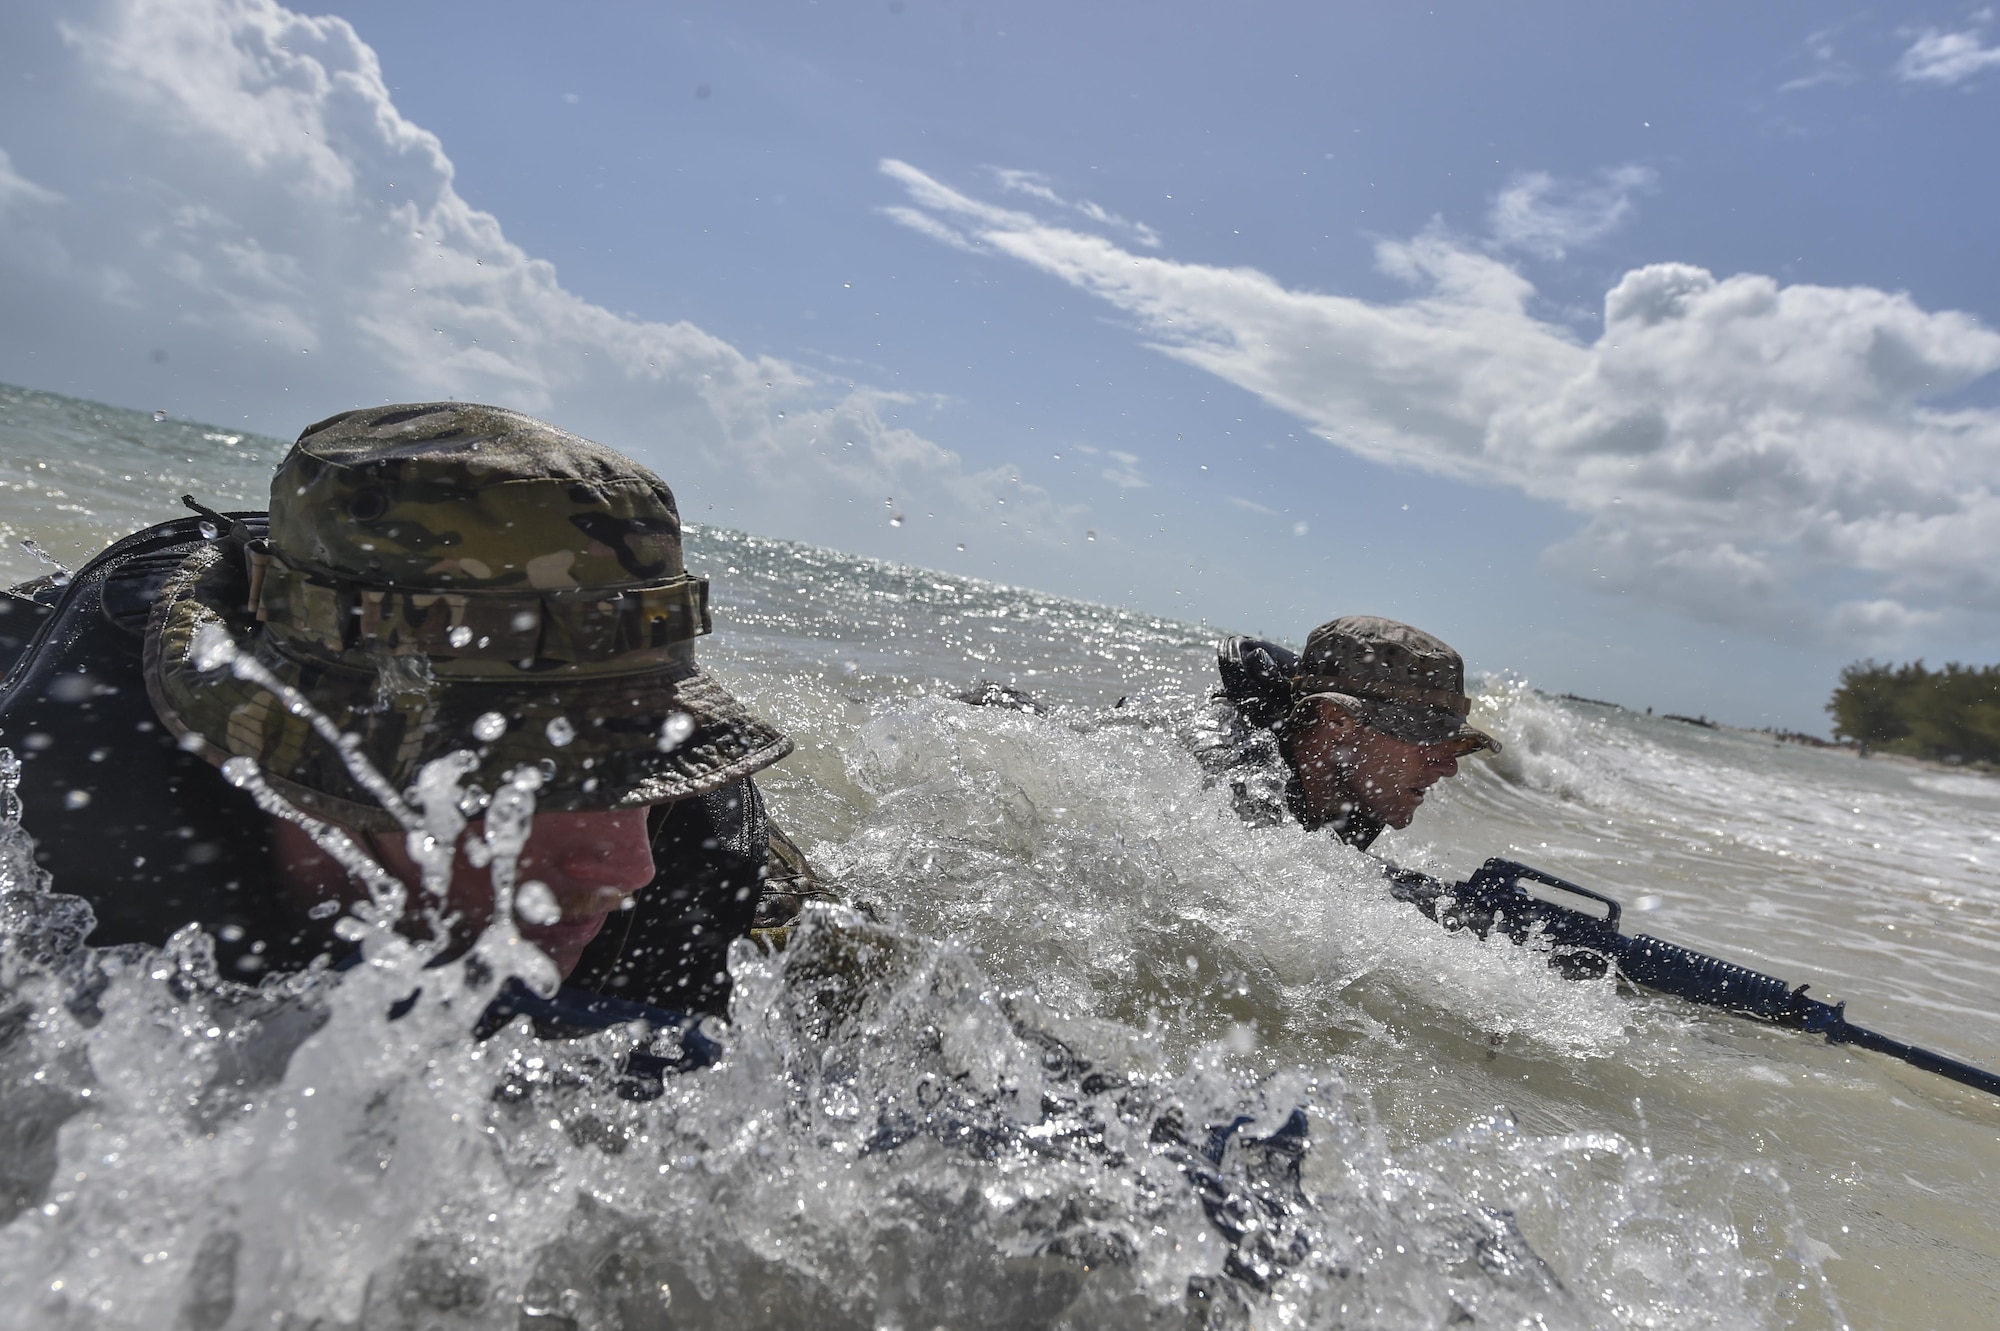 A U.S. Marine and Airman perform scout swimmer training during Marine Special Operations School’s Individual Training Course, March 24, 2017, at Key West, Fla. For the first time, U.S. Air Force Special Tactics Airmen spent three months in Marine Special Operations Command’s Marine Raider training pipeline, representing efforts to build joint mindsets across special operations forces.  (U.S. Air Force photo by Senior Airman Ryan Conroy)